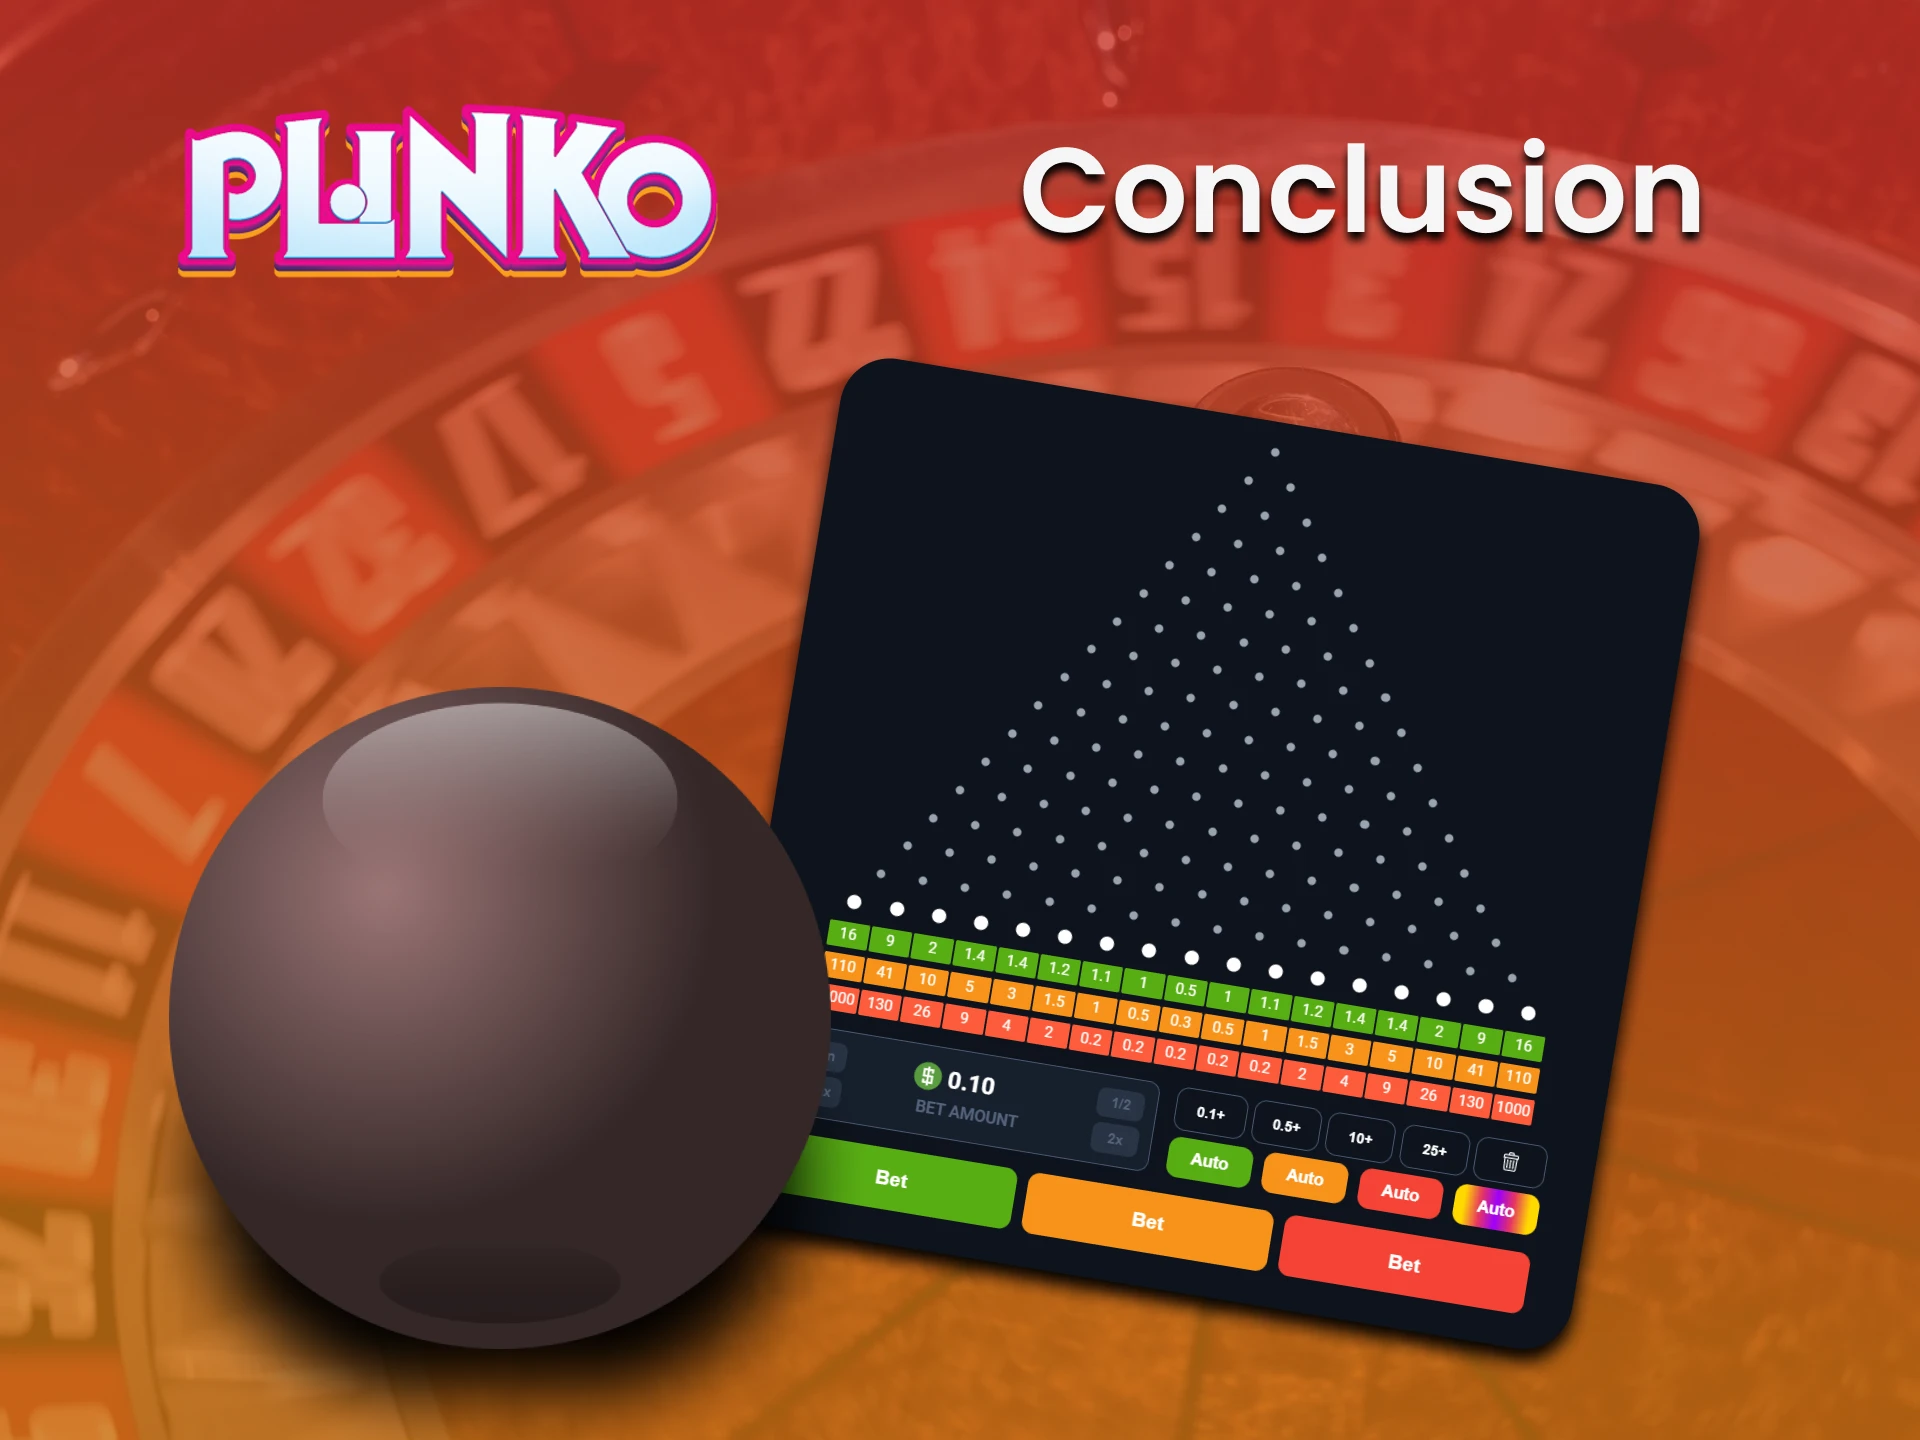 Plinko is a popular game that you can have a good time with.